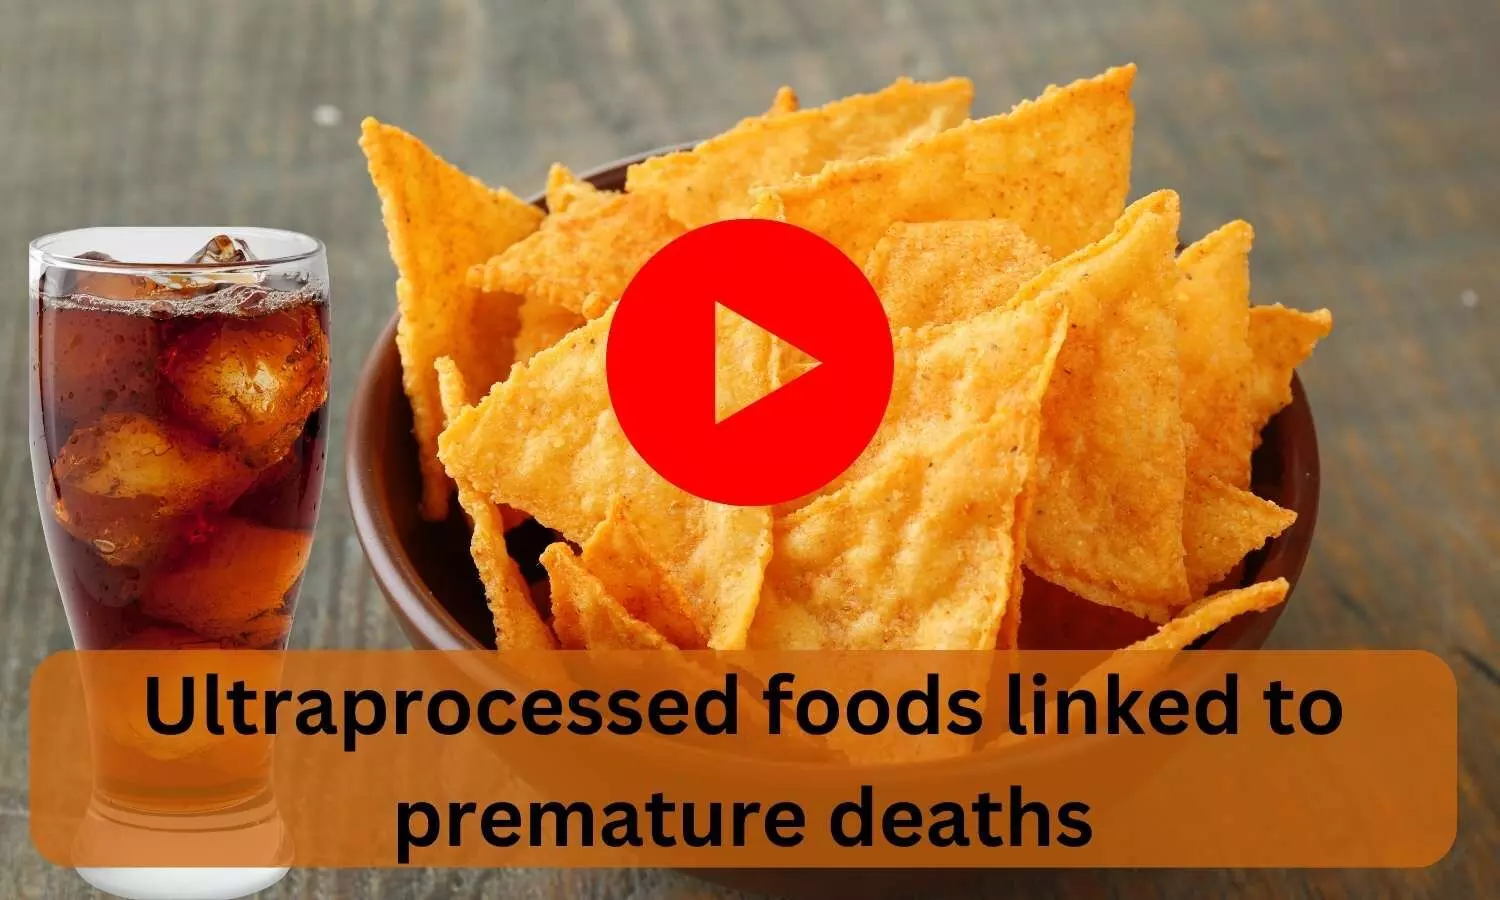 Ultraprocessed foods linked to premature deaths